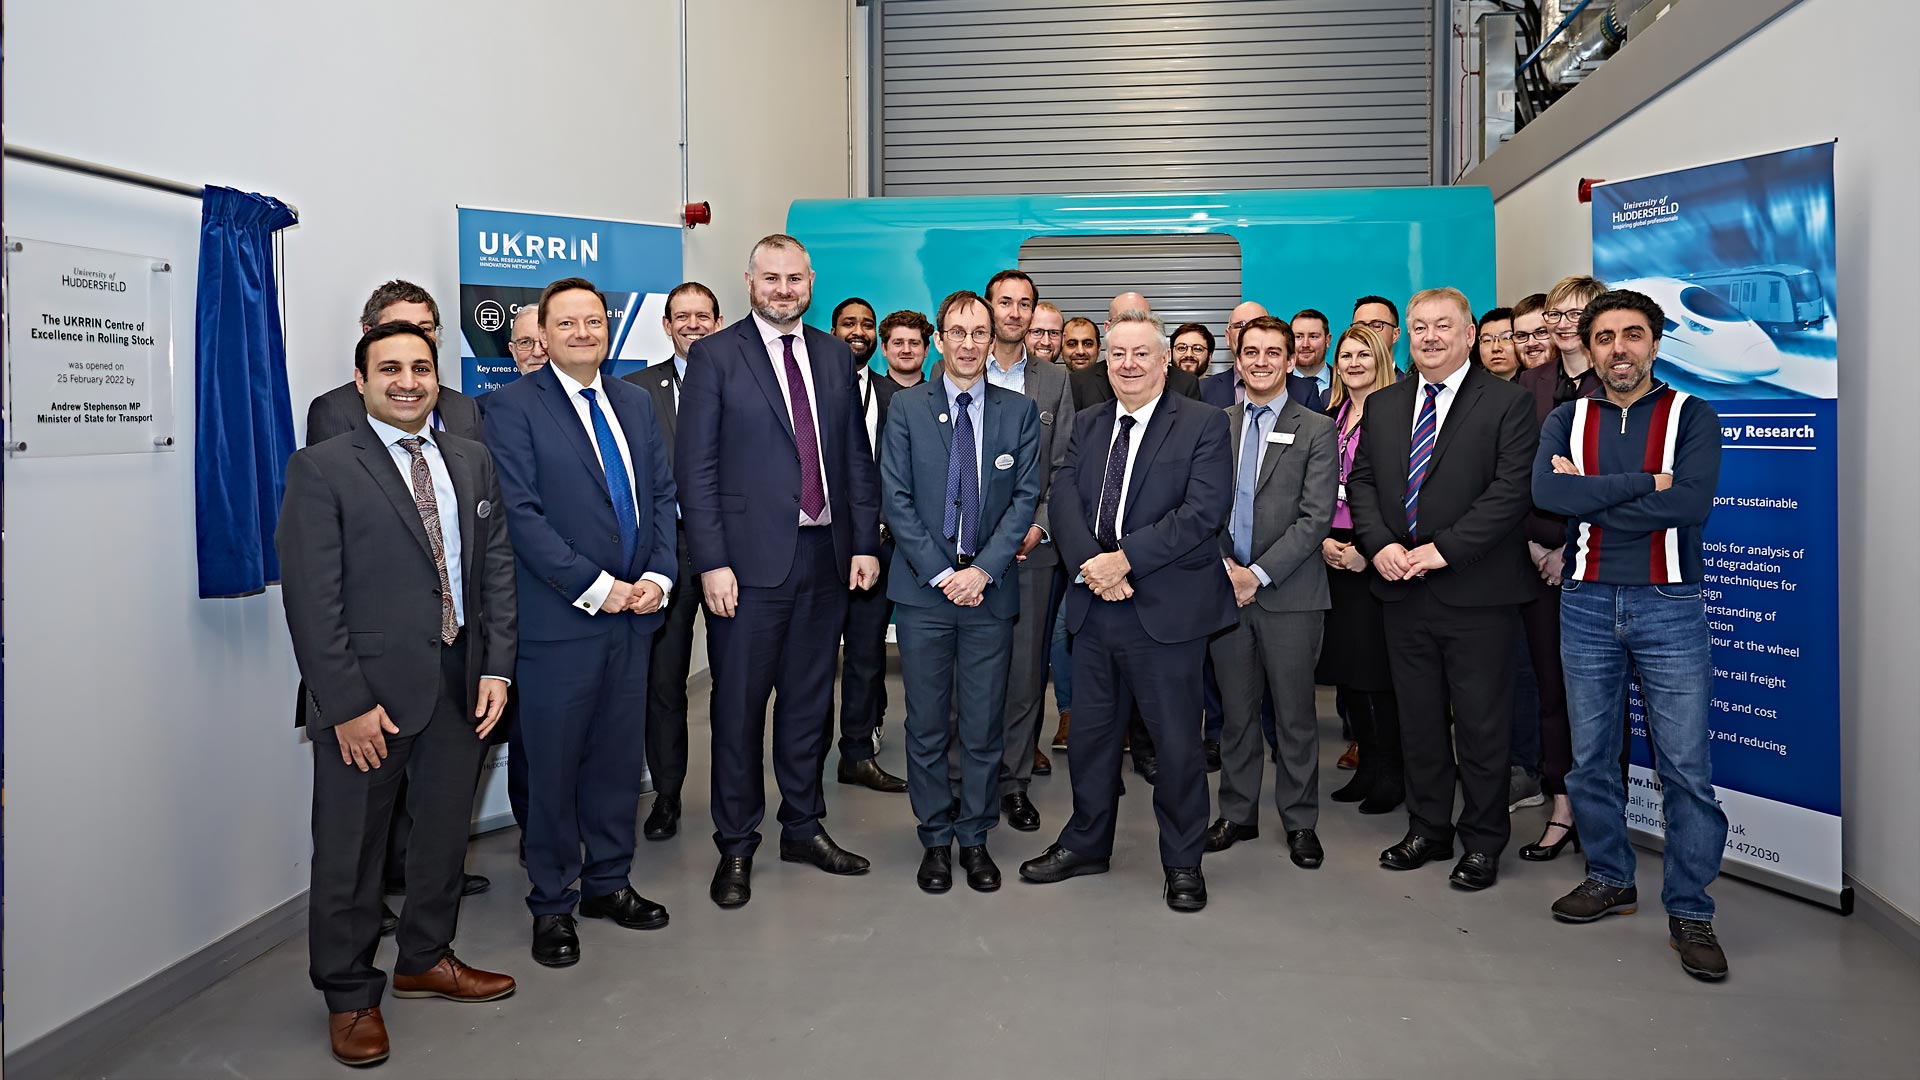 Group photo at the official opening of the Centre of Excellence in Rolling Stock at the University of Huddersfield